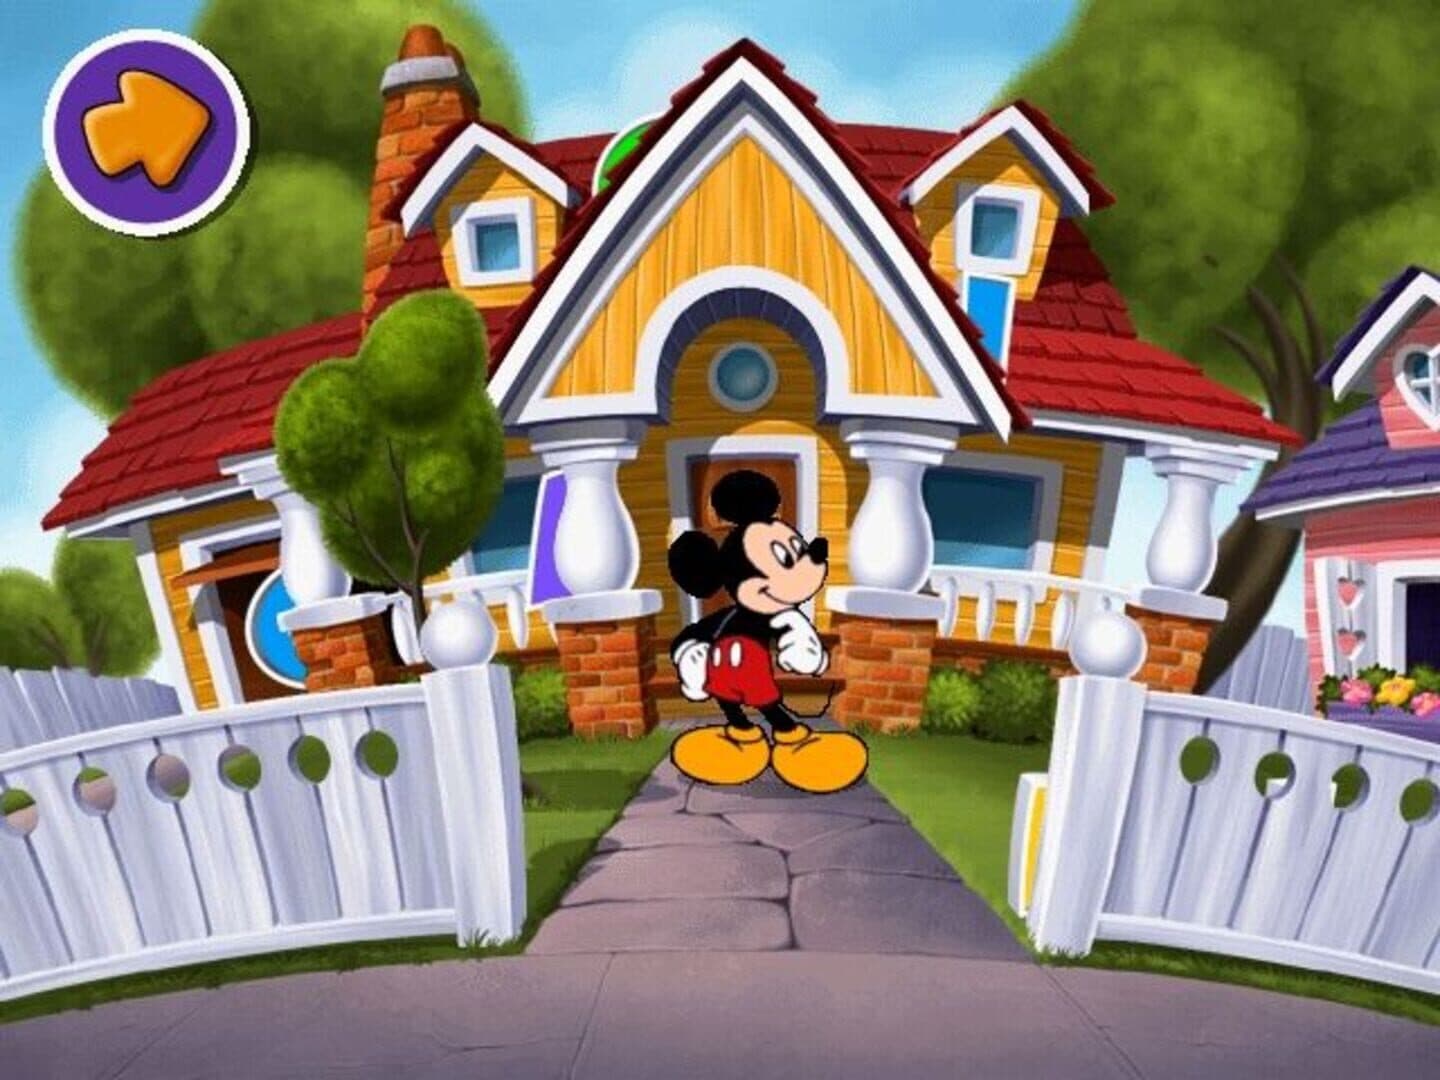 Disney's Mickey Mouse Toddler Image